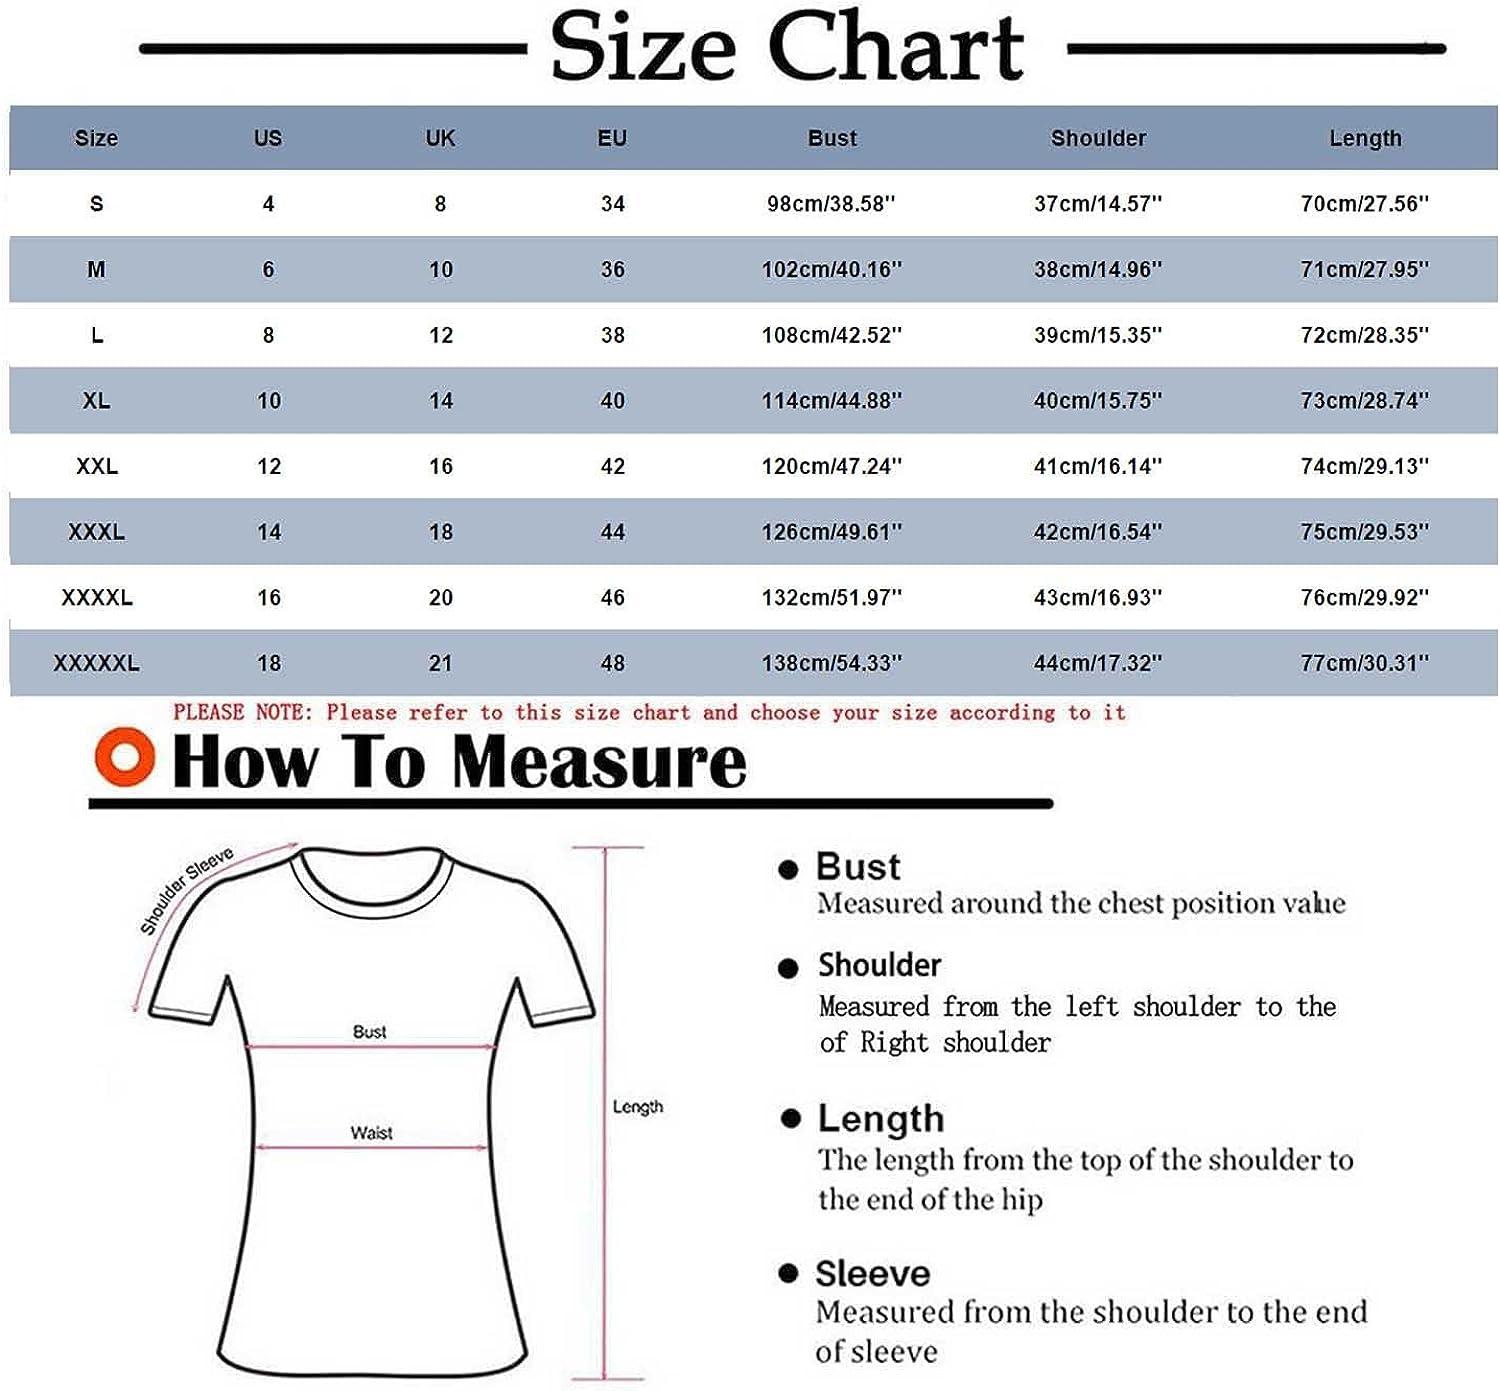 Dressy Tops for Women, Women's Loose Fit Tunic Tops for Leggings Trendy  Summer Short Sleeve Round Neck T-shirts Shirts Print Blouse Tees tunic  dresses to wear with leggings 